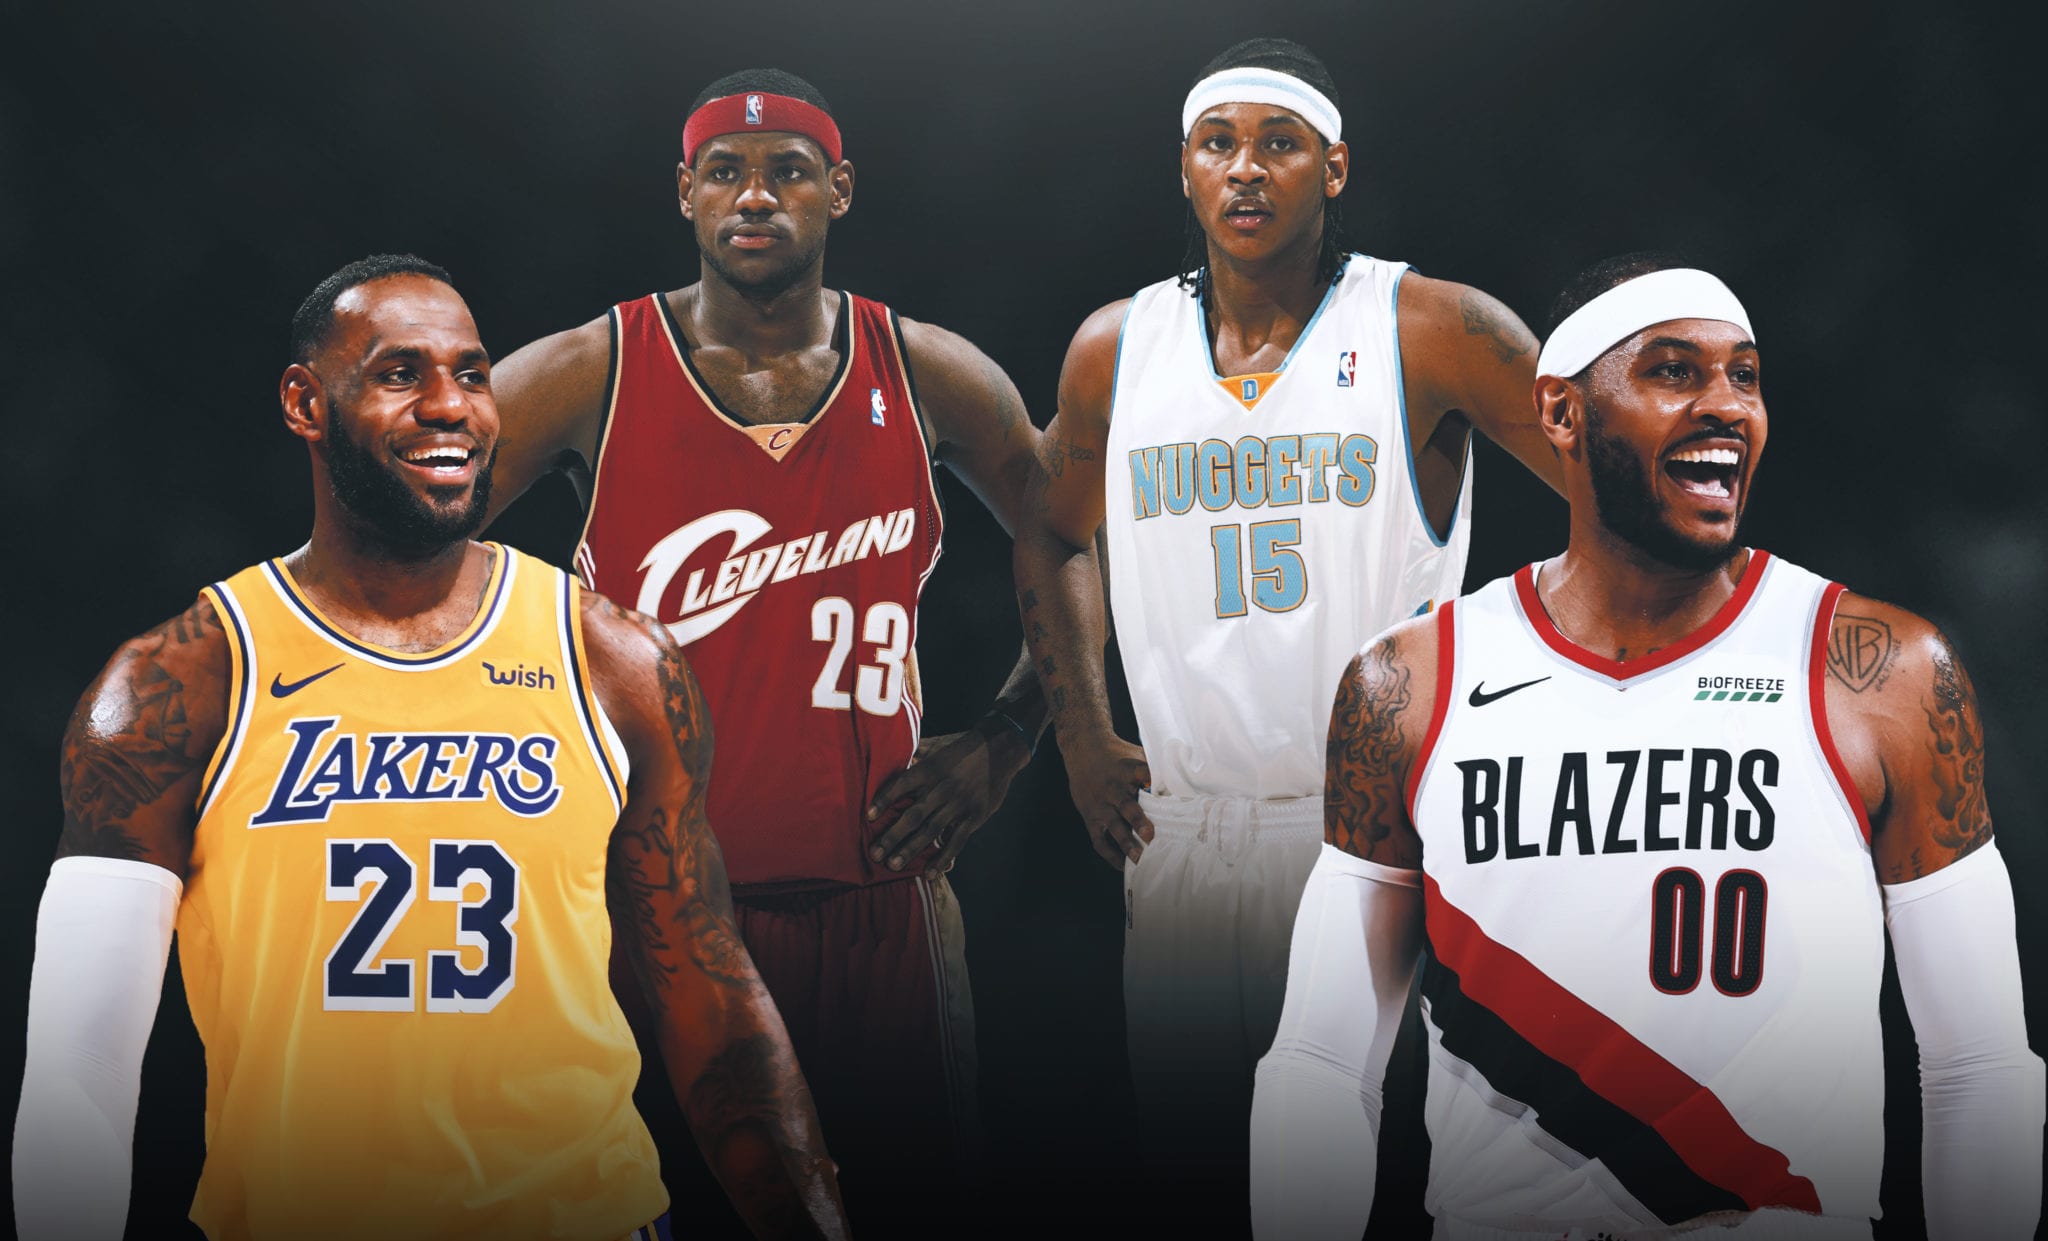 LeBron James and Carmelo Anthony through the years: From the